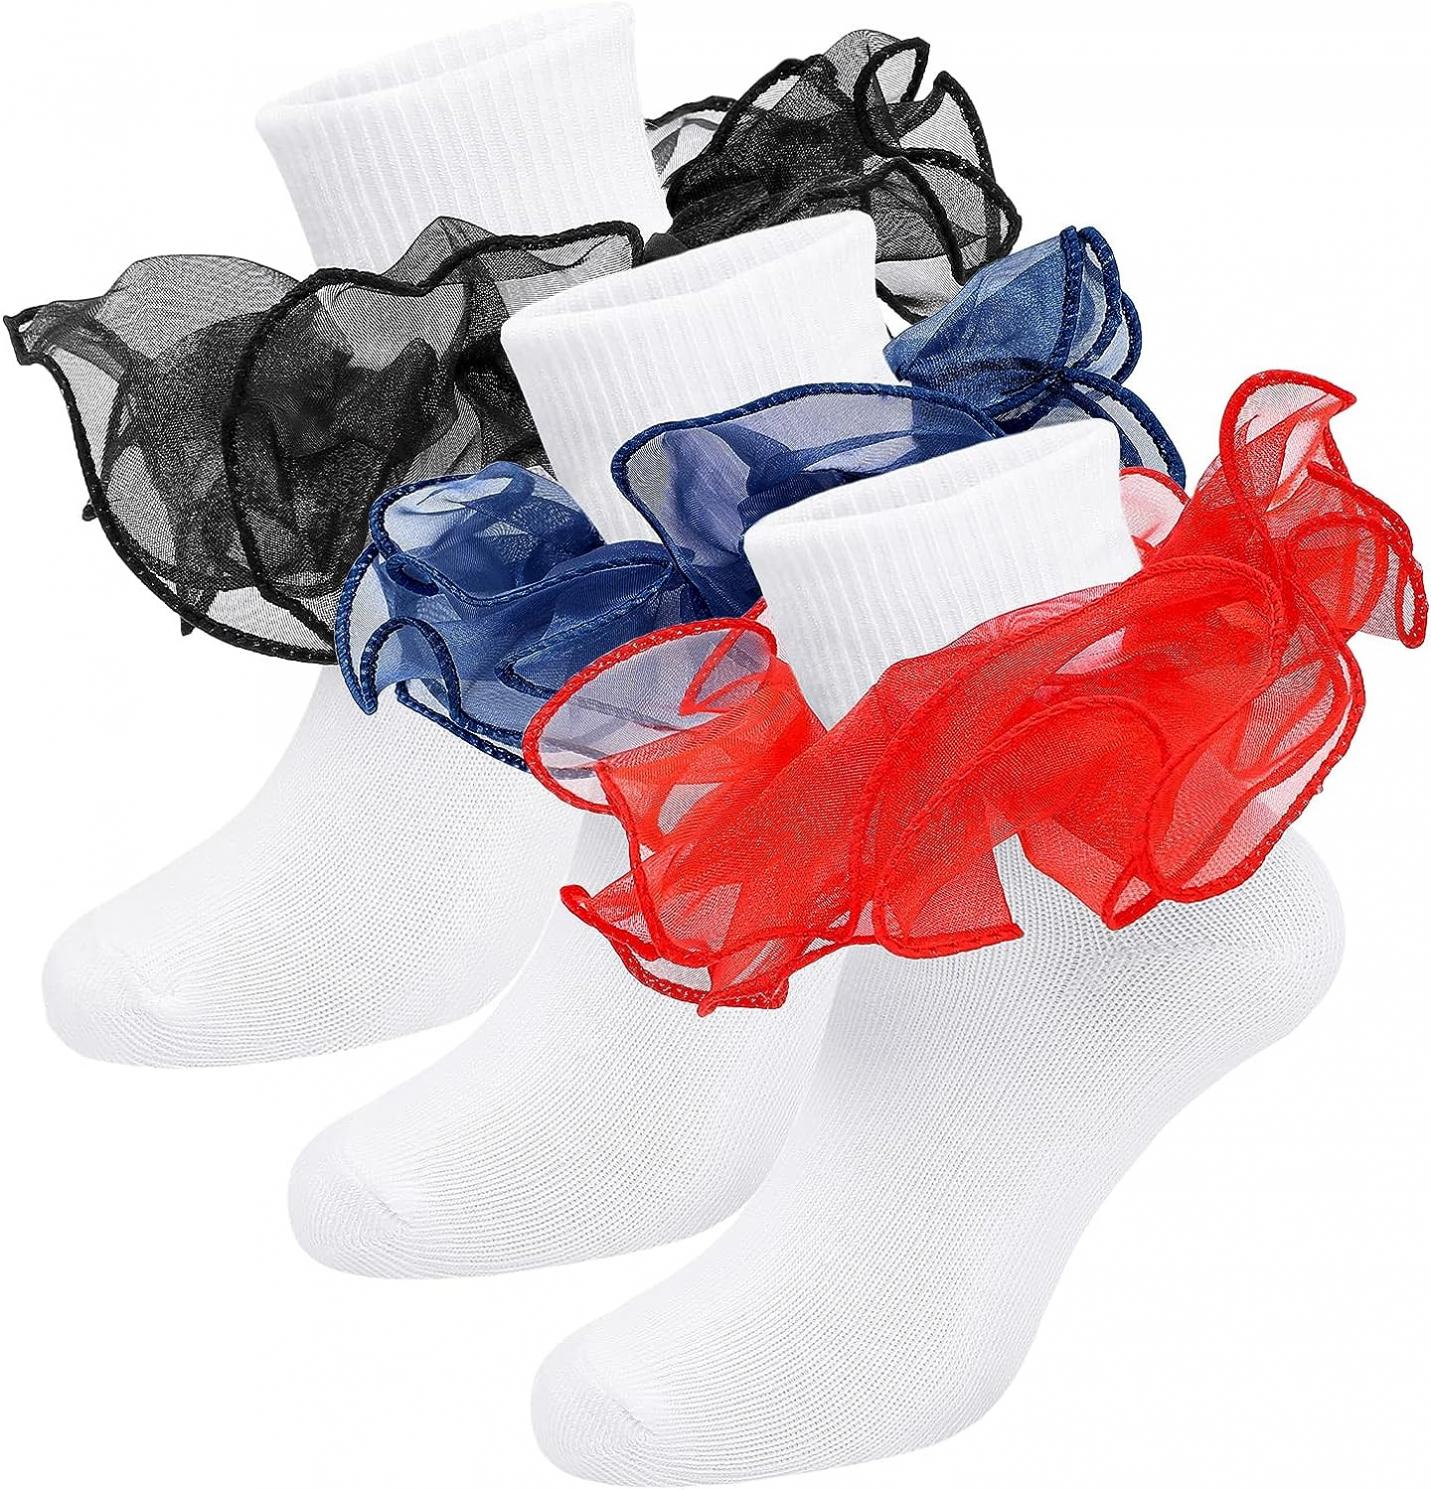 Witwot Girls Ruffle Socks Toddler Double Lace Frilly Pageant Dress Sock Turn Cuff Socks